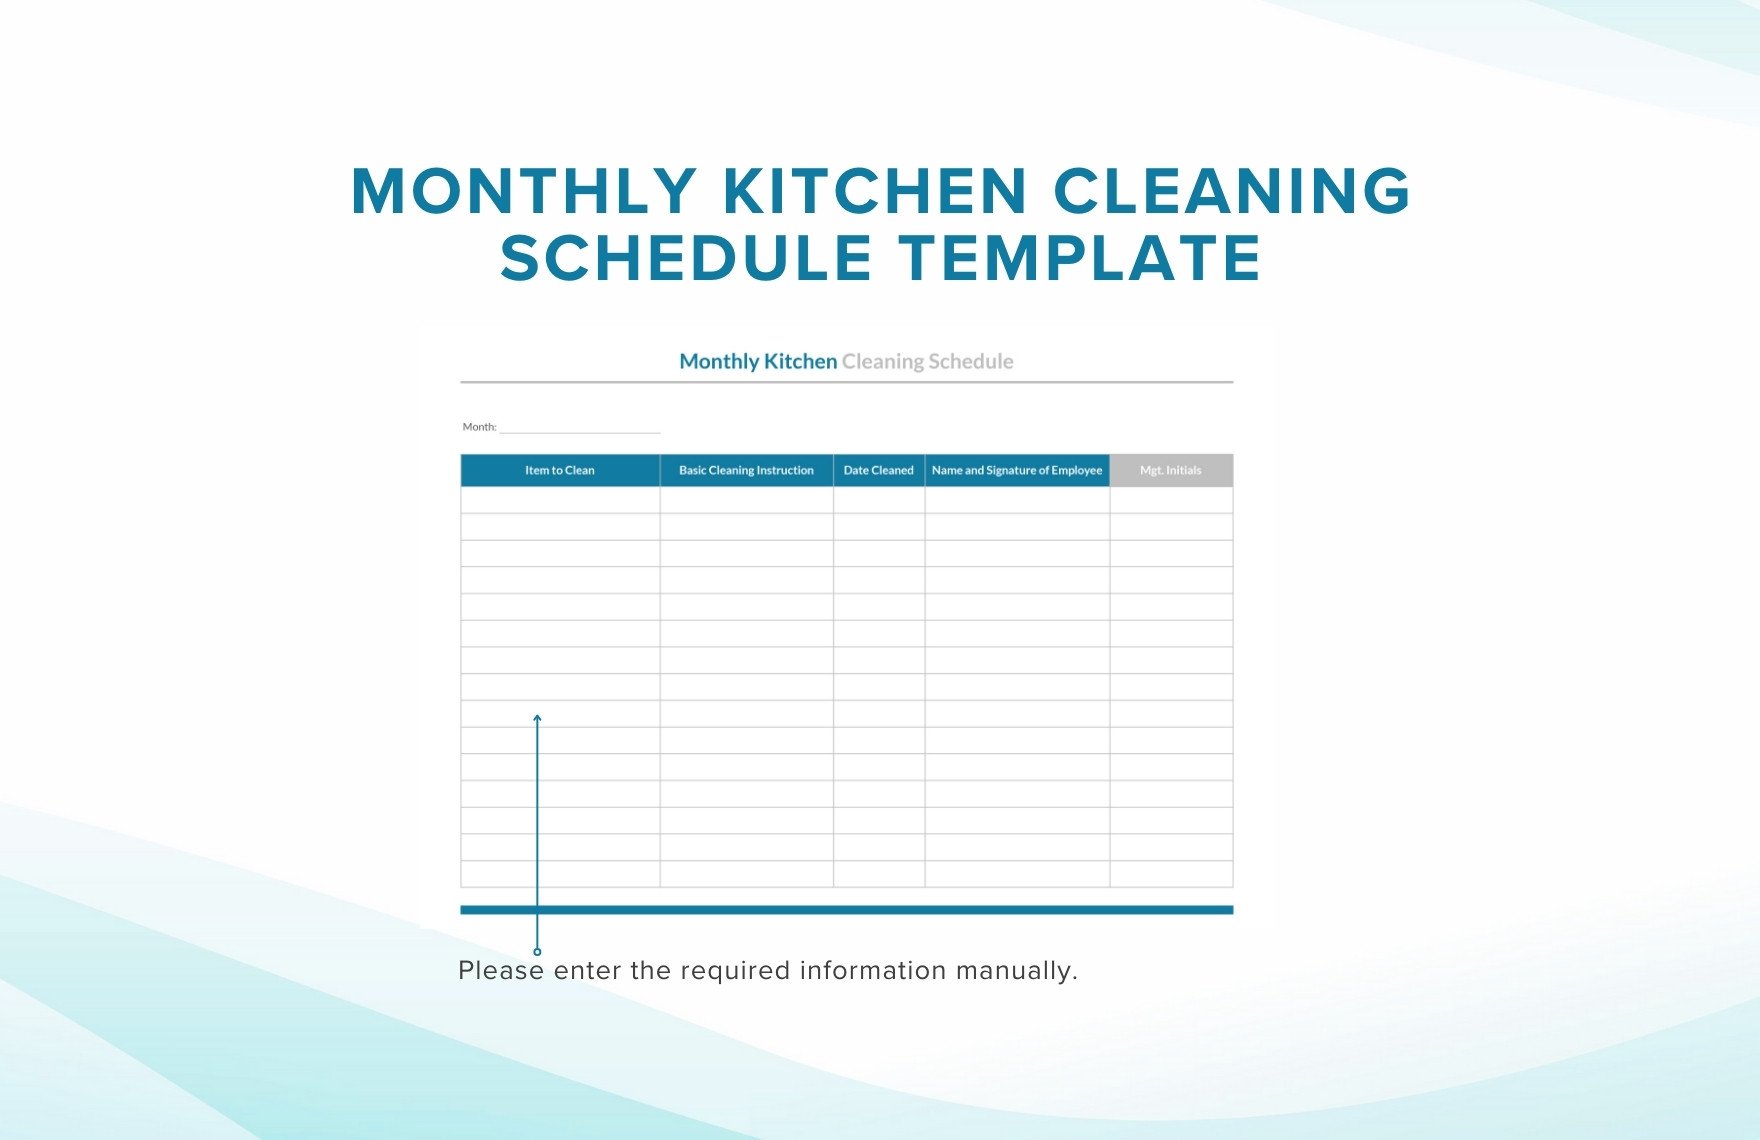 Monthly Kitchen Cleaning Schedule Template